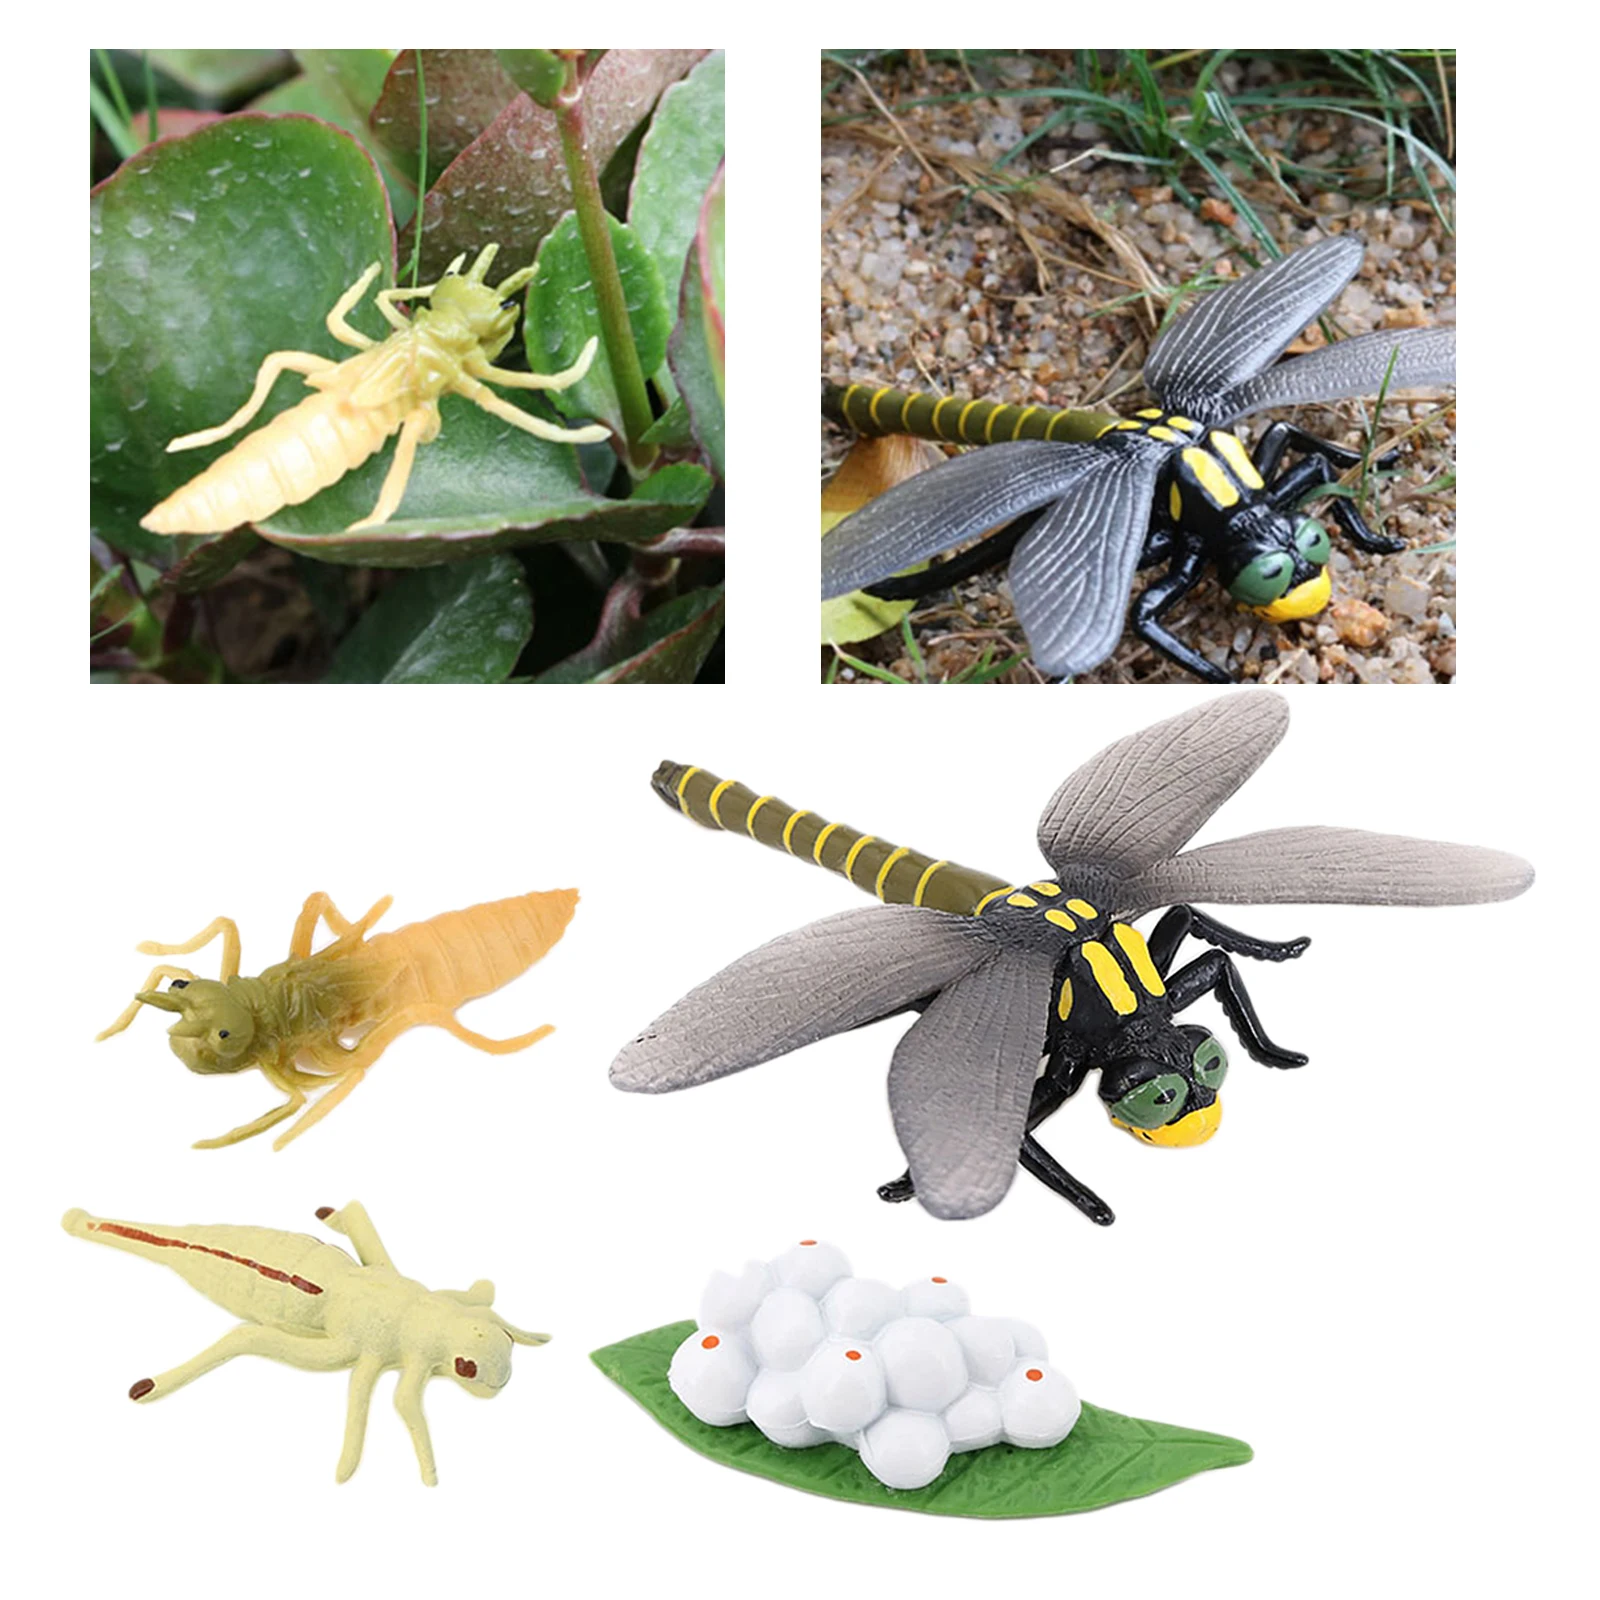 Assorted Plastic Insects Dragonfly Bugs Figures Model Kids Educational Toys